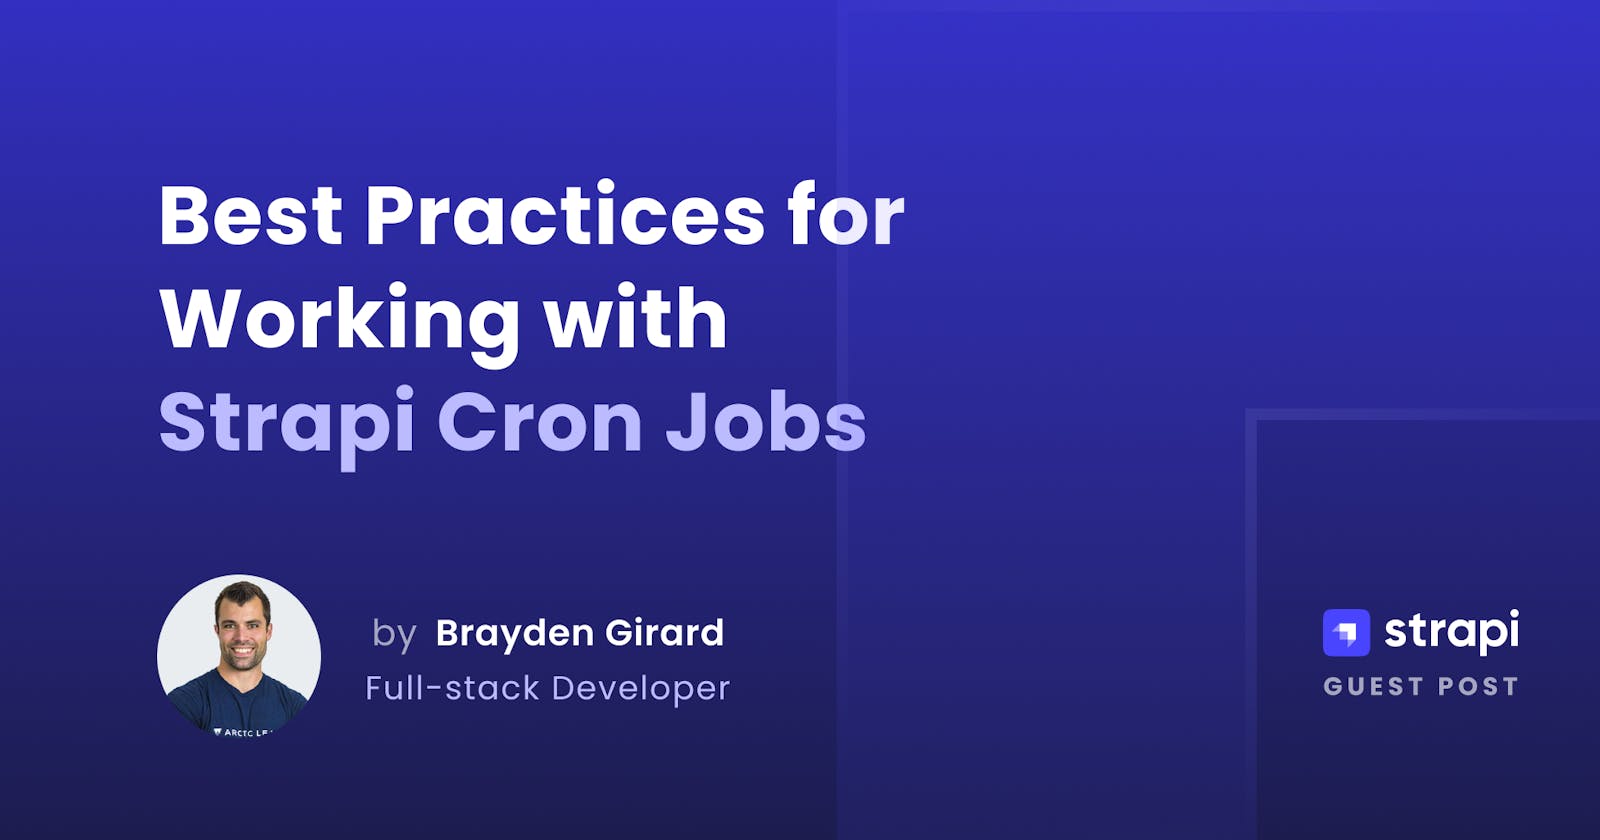 Best Practices for Working with Strapi Cron Jobs